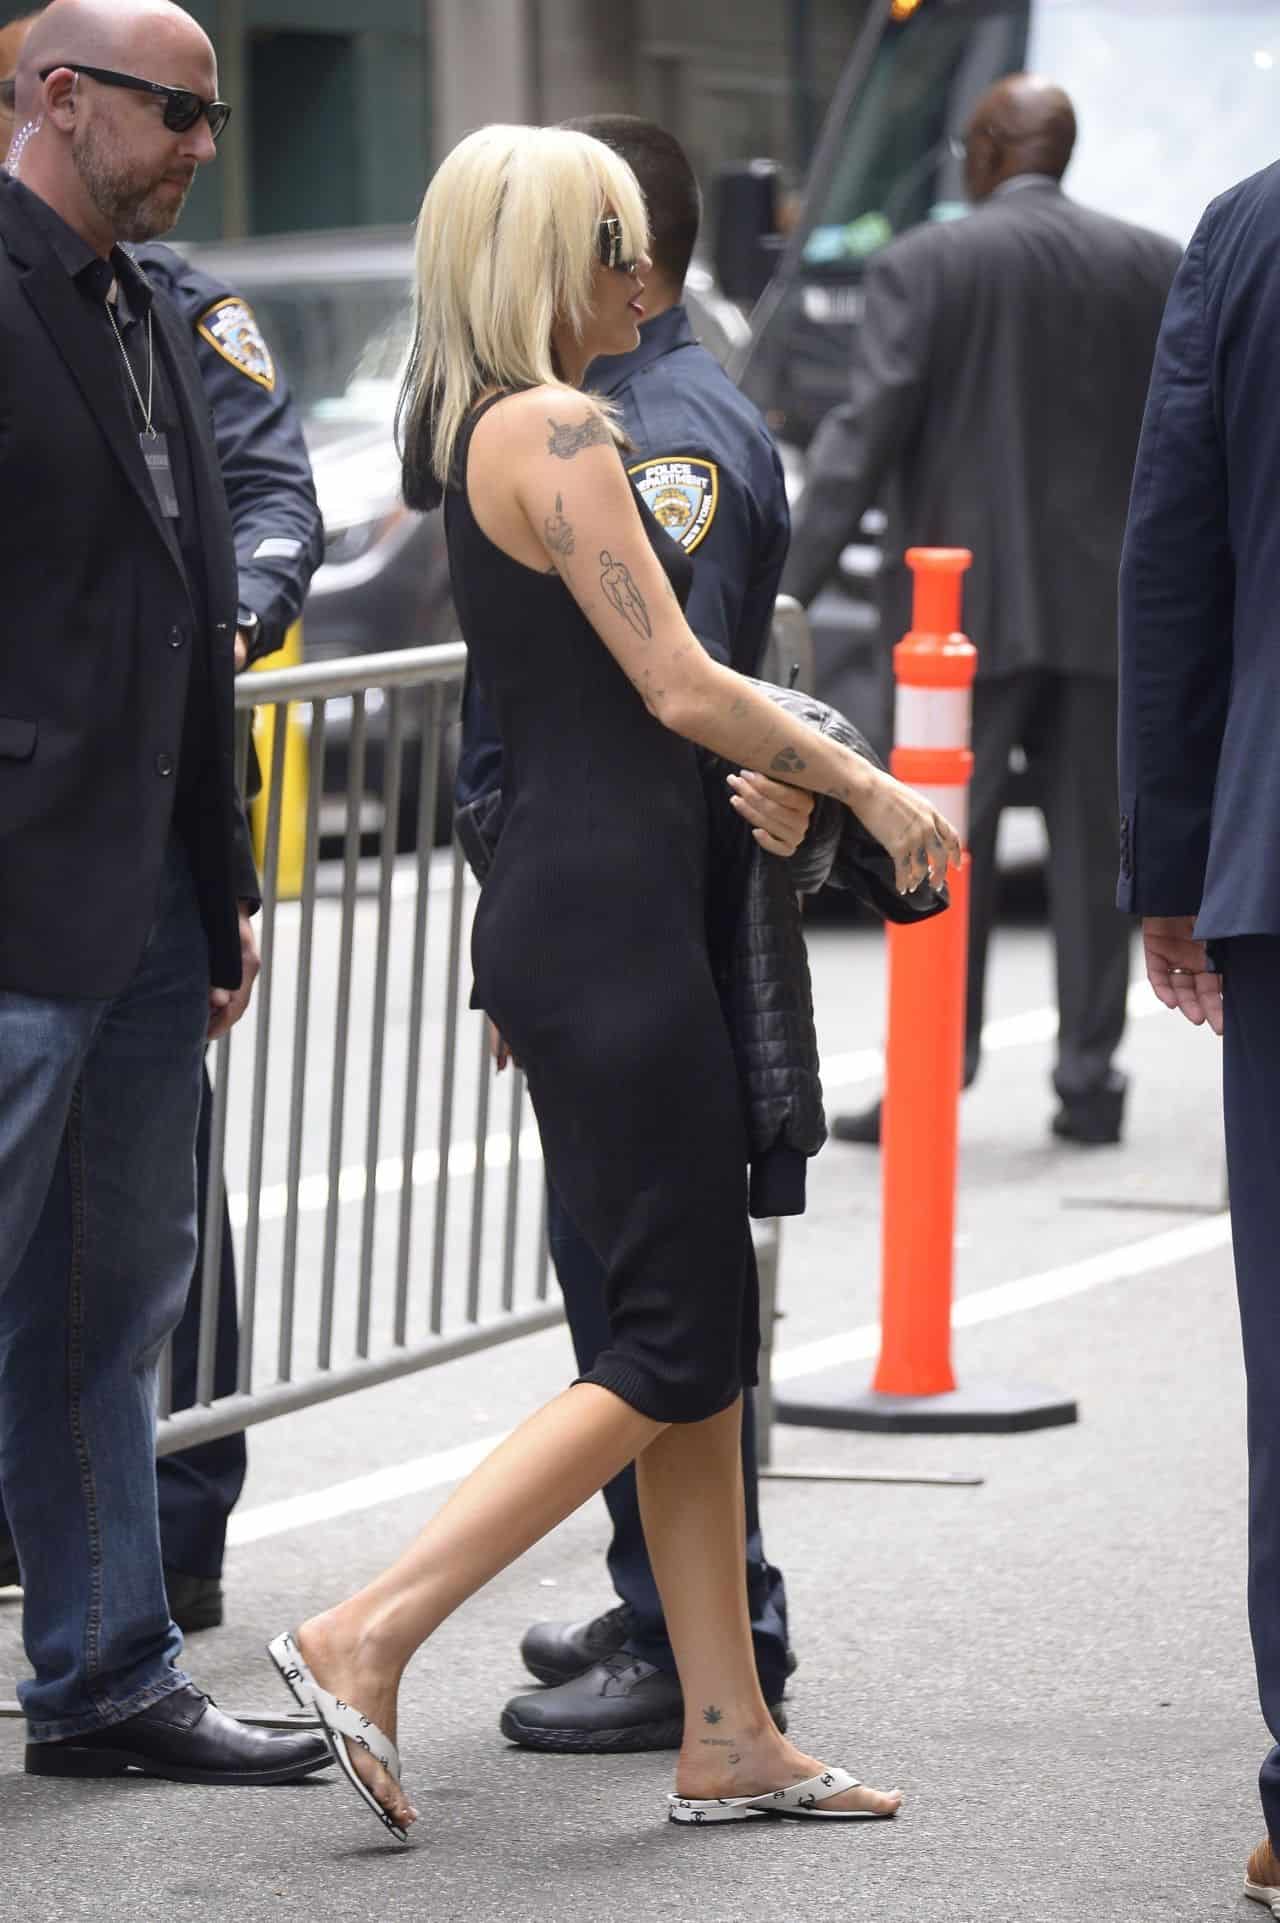 Miley Cyrus Turns Heads in a Black Dress at NBCUniversal Event